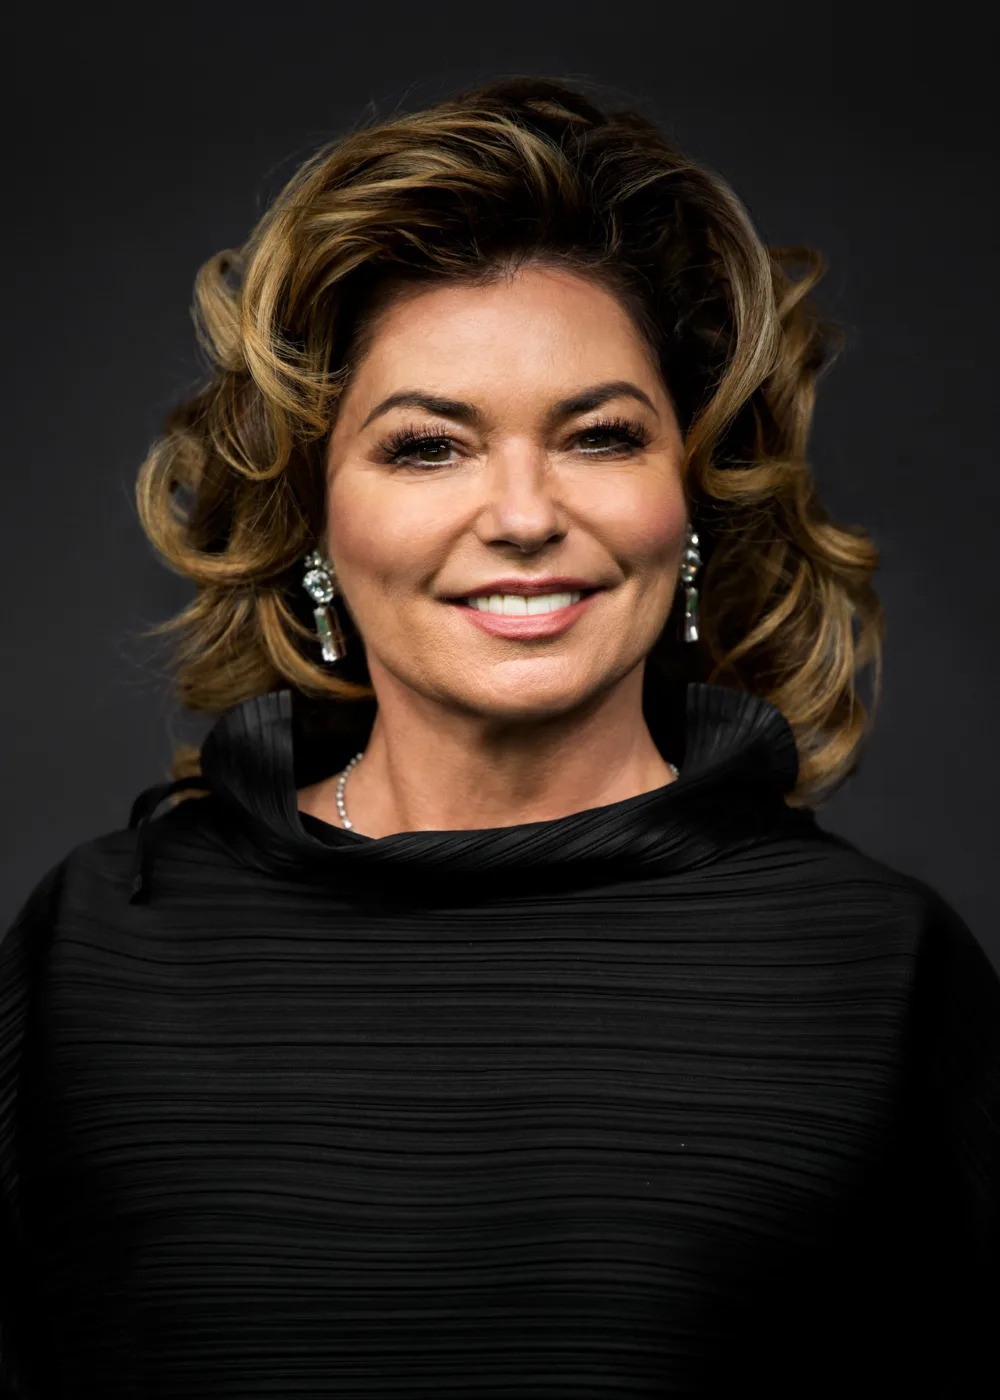 Shania Twain is a Canadian singer, songwriter, and actress. She was born on August 28, 1965, in Windsor, Ontario, Canada. Twain is one of the best-selling music artists of all time, having sold over 100 million records worldwide. She first gained fame in the mid-1990s with her second album, 